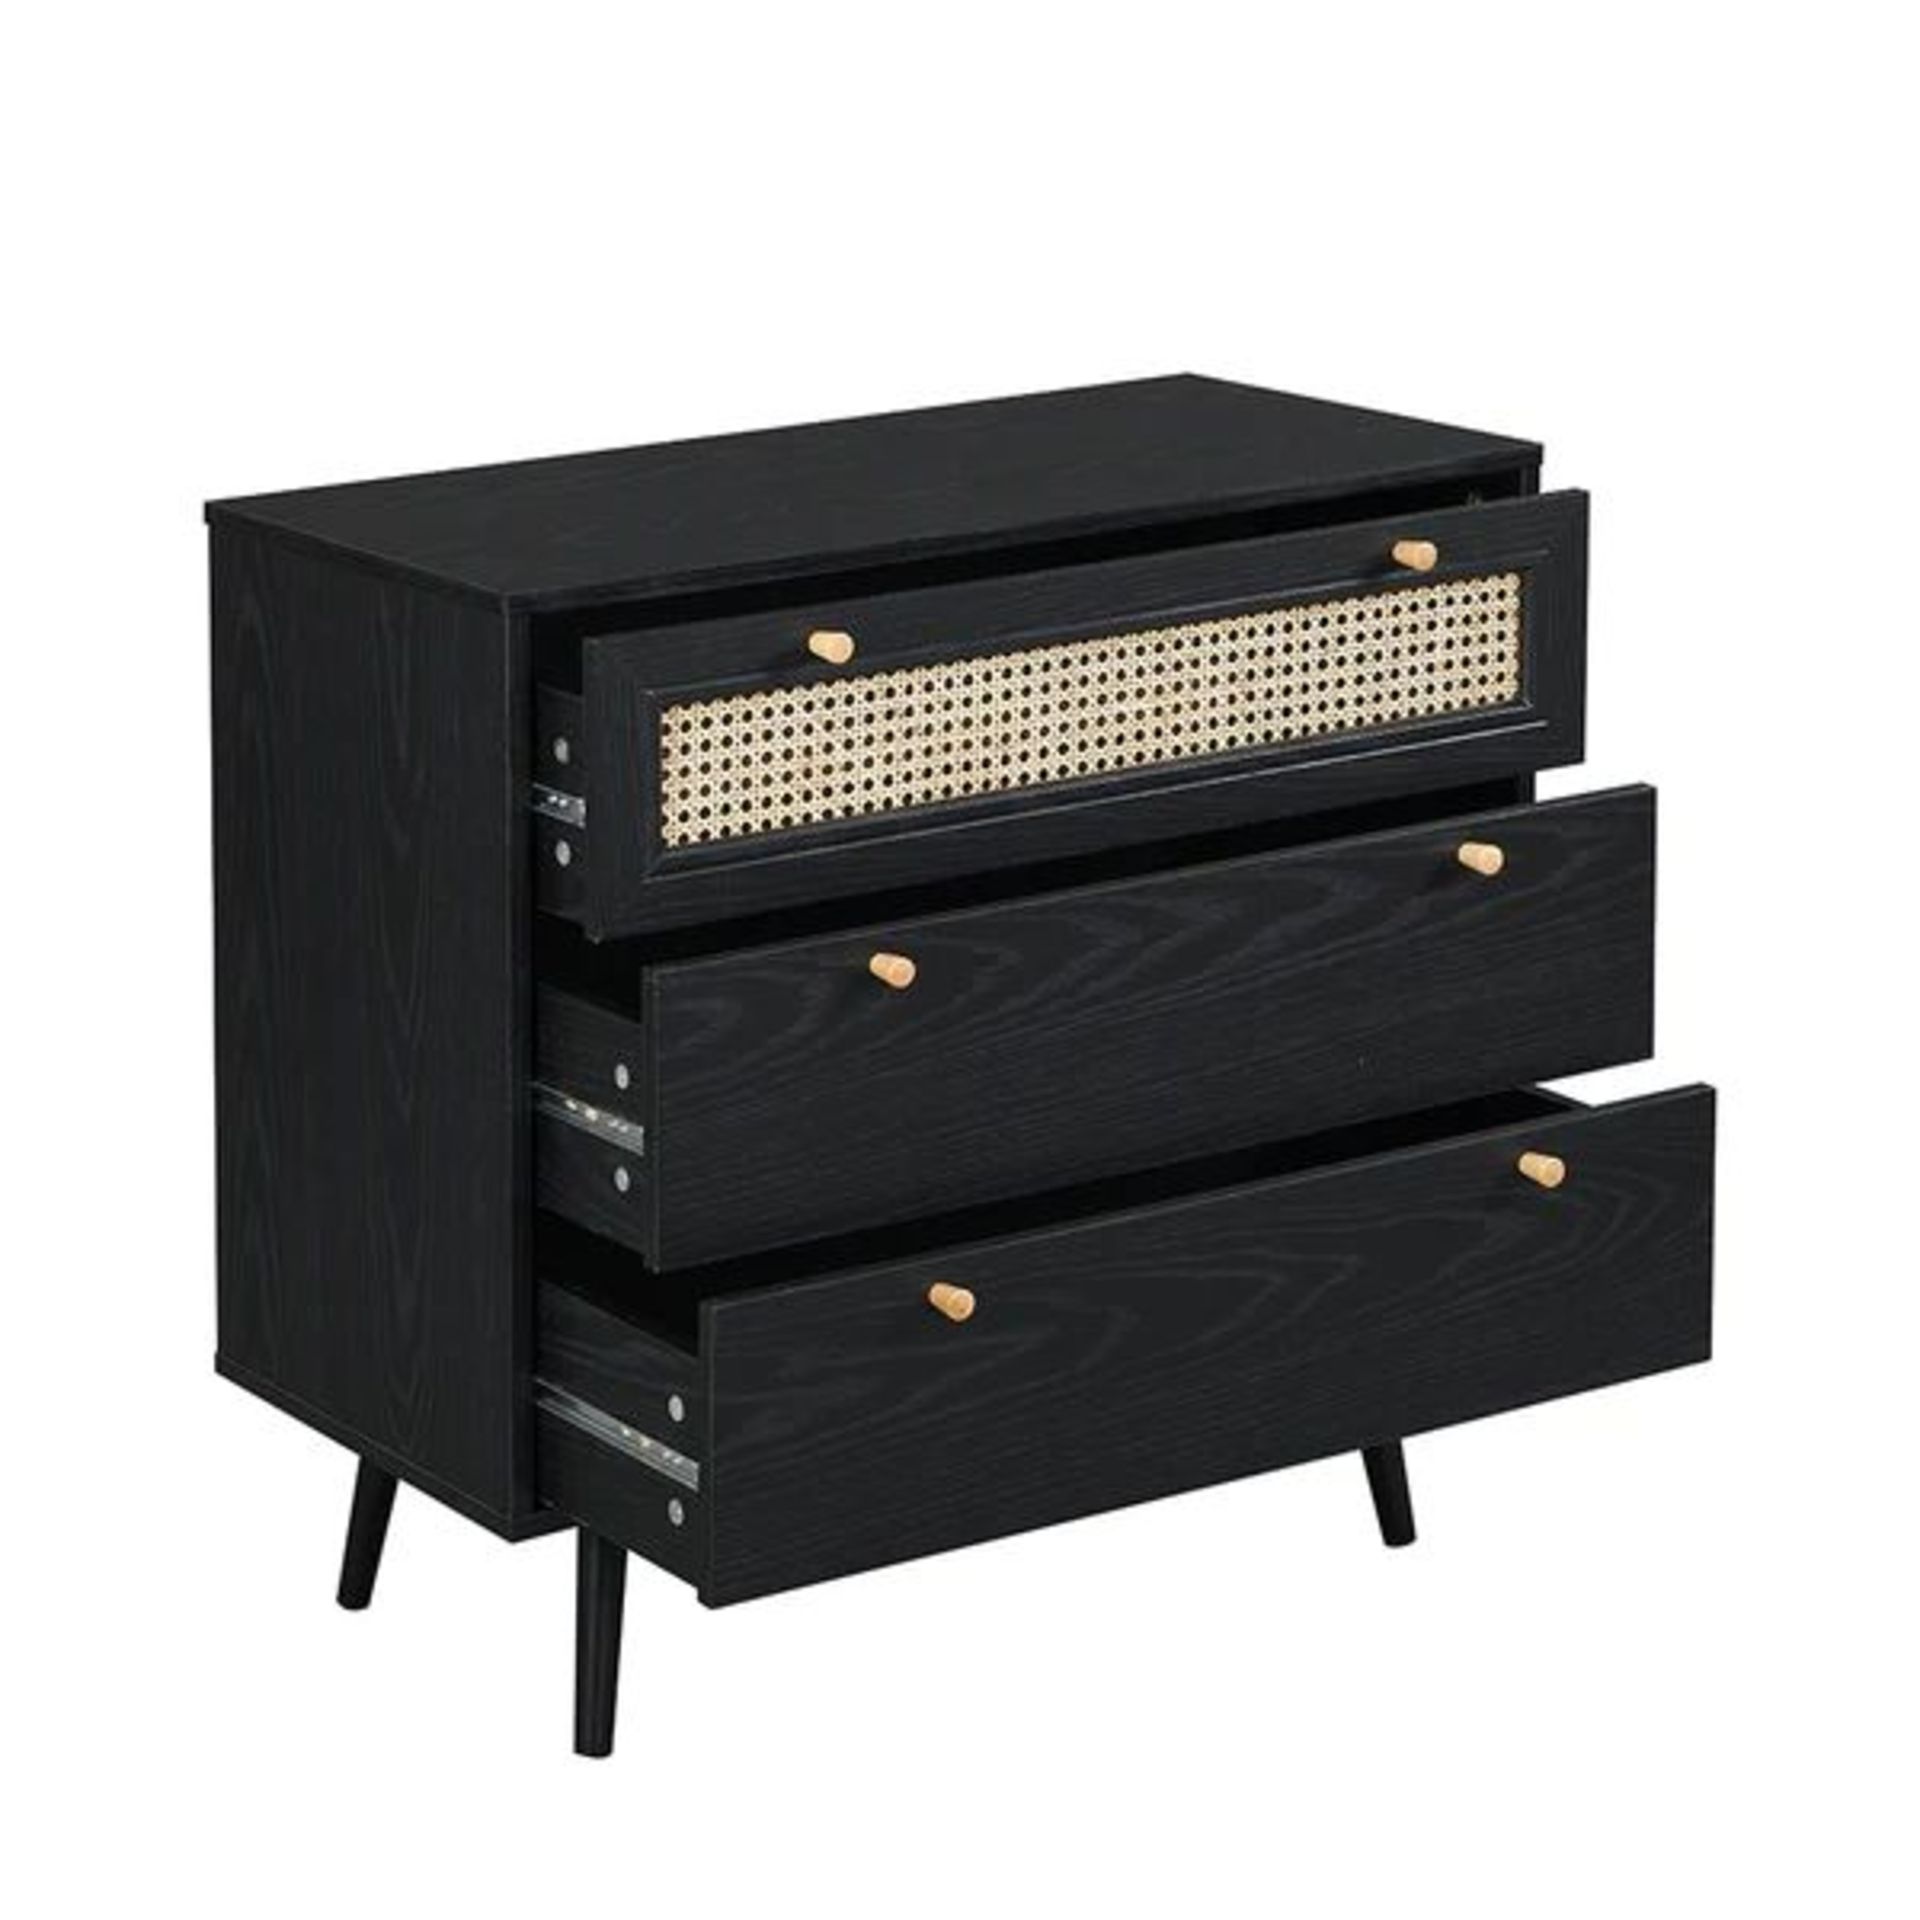 Anya Woven Rattan Chest of 3 Drawer in Black Colour. - ER30. RRP £199.99. Our Anya drawer chest is - Image 2 of 2